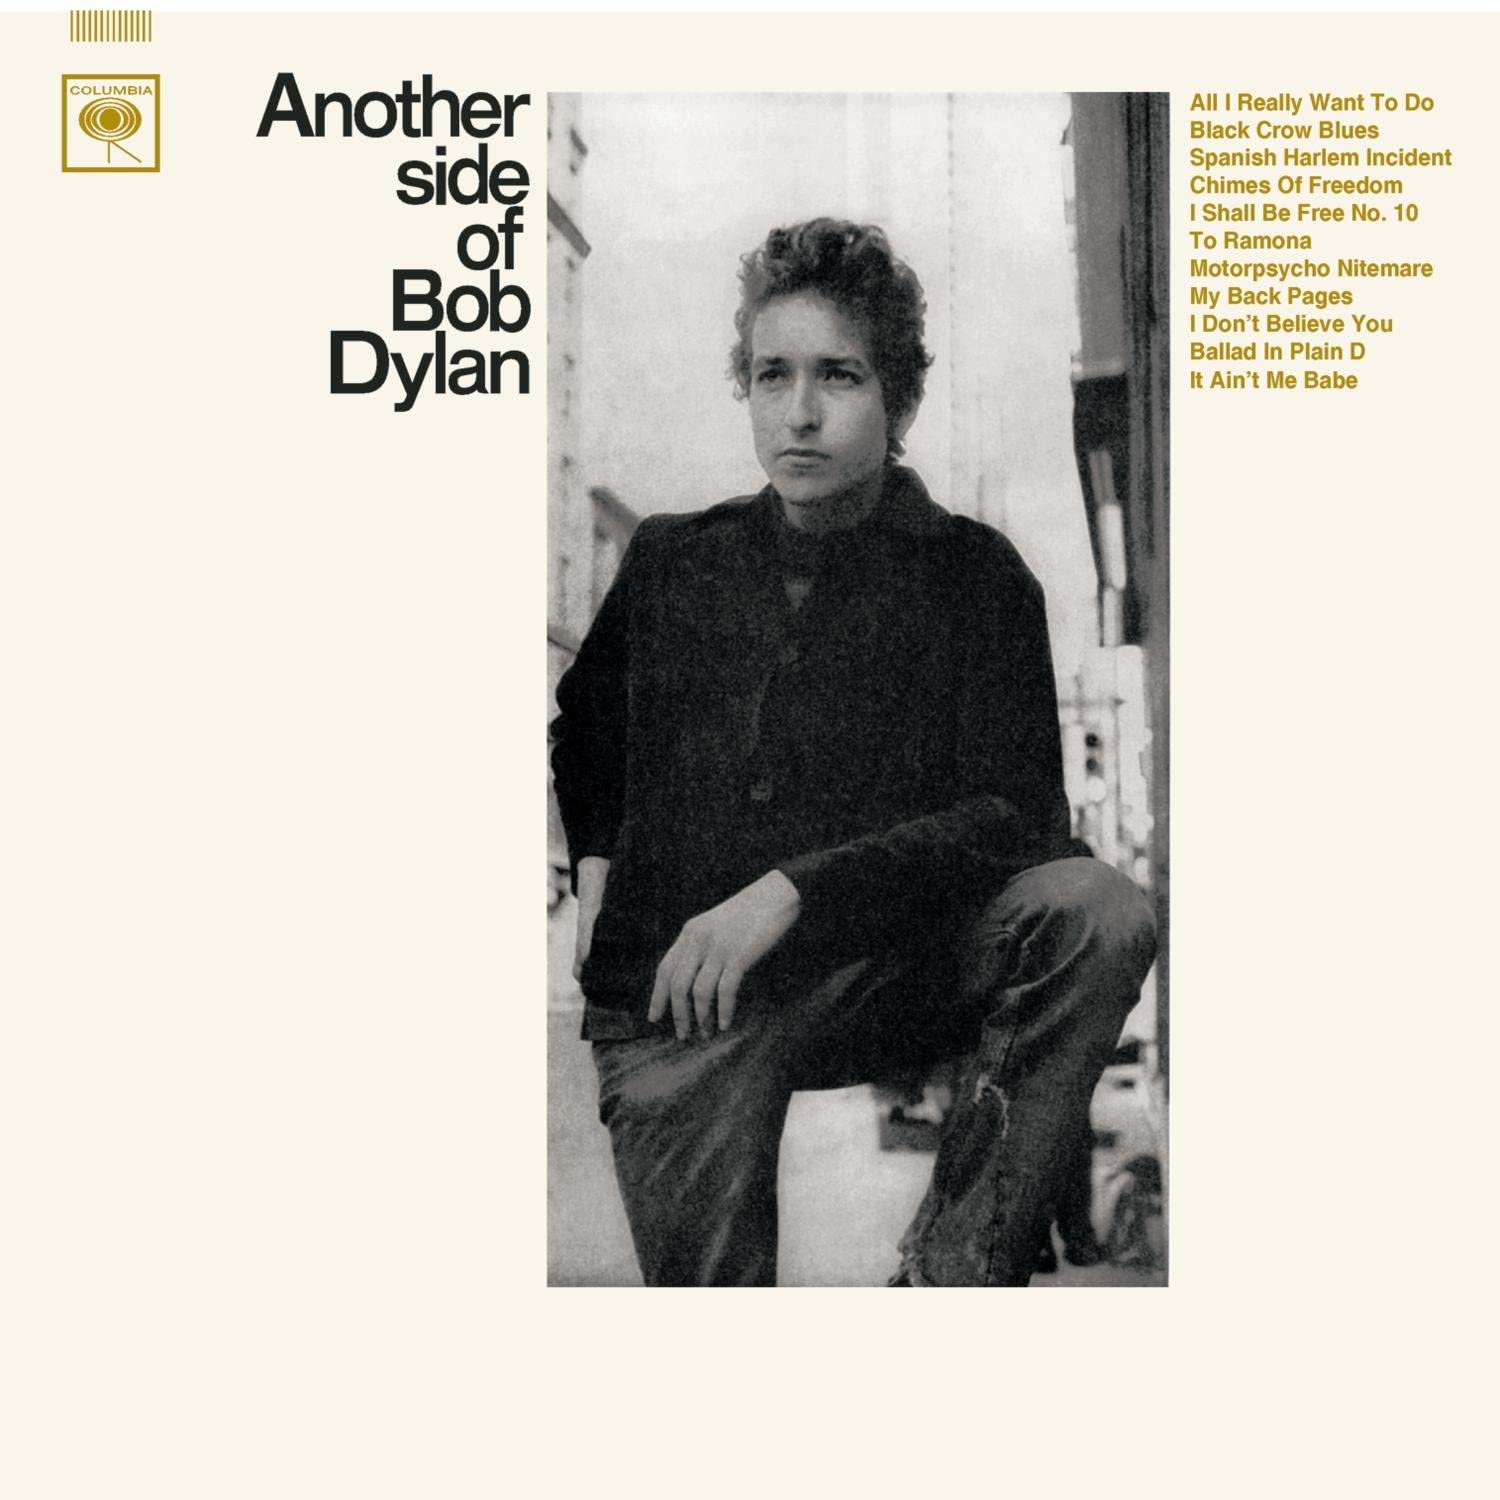 60 anni dal primo concerto - Another side of Bob Dylan